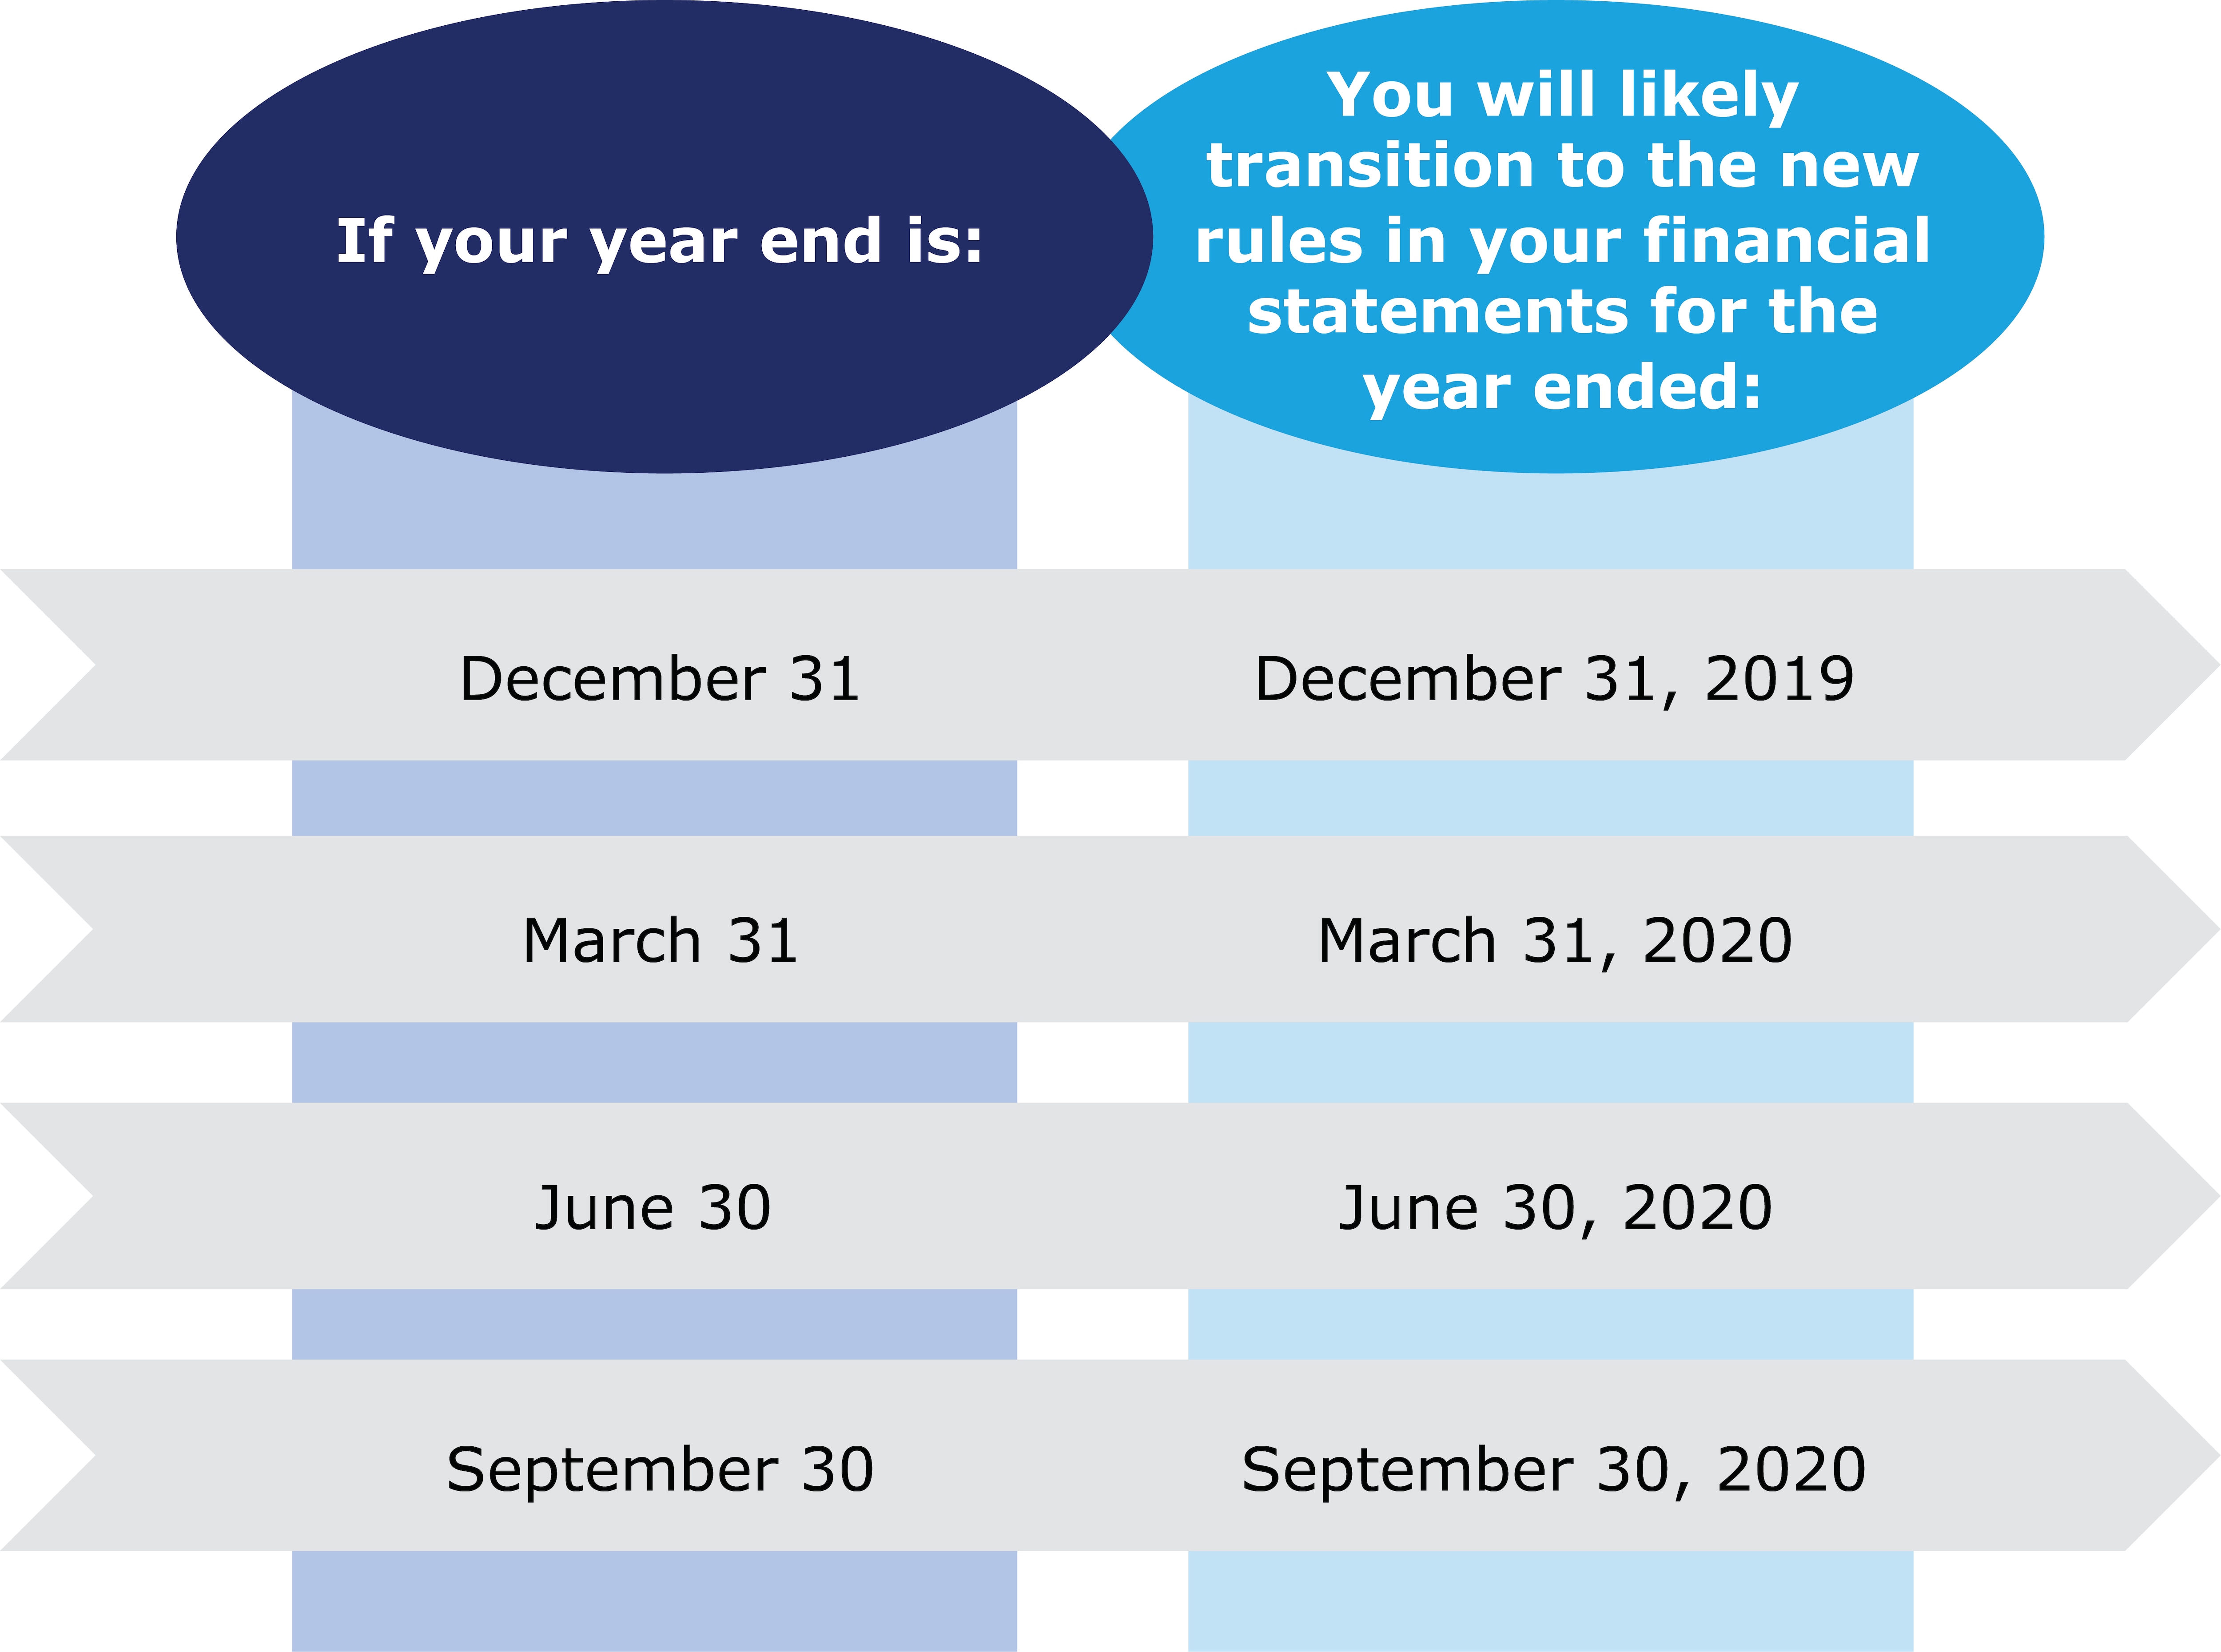 What’s the effective date for my organization?